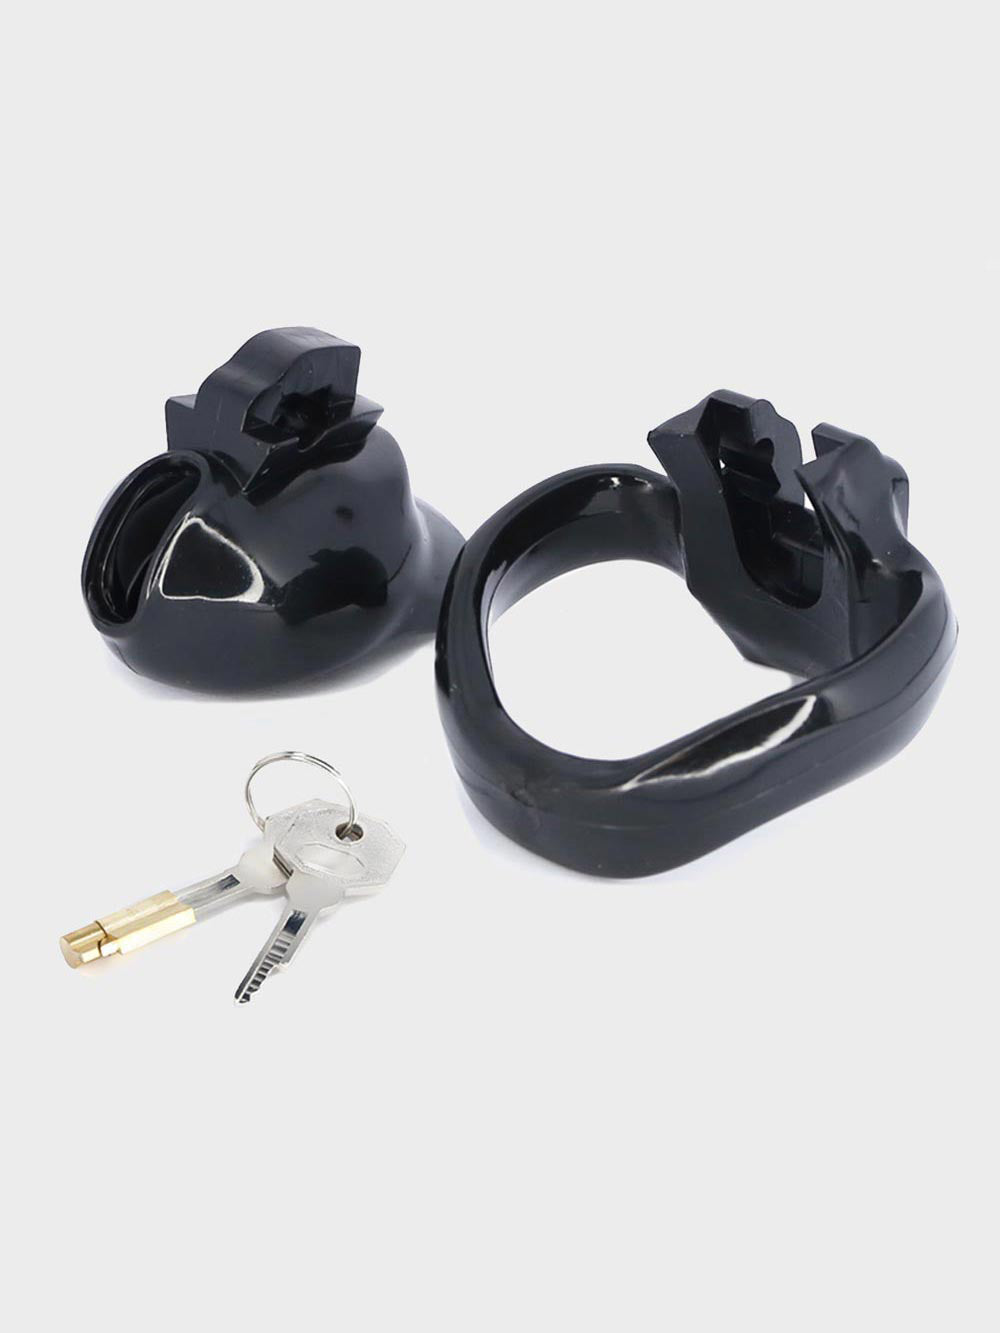 The V4 is a chastity cage made to lock up your submissive 